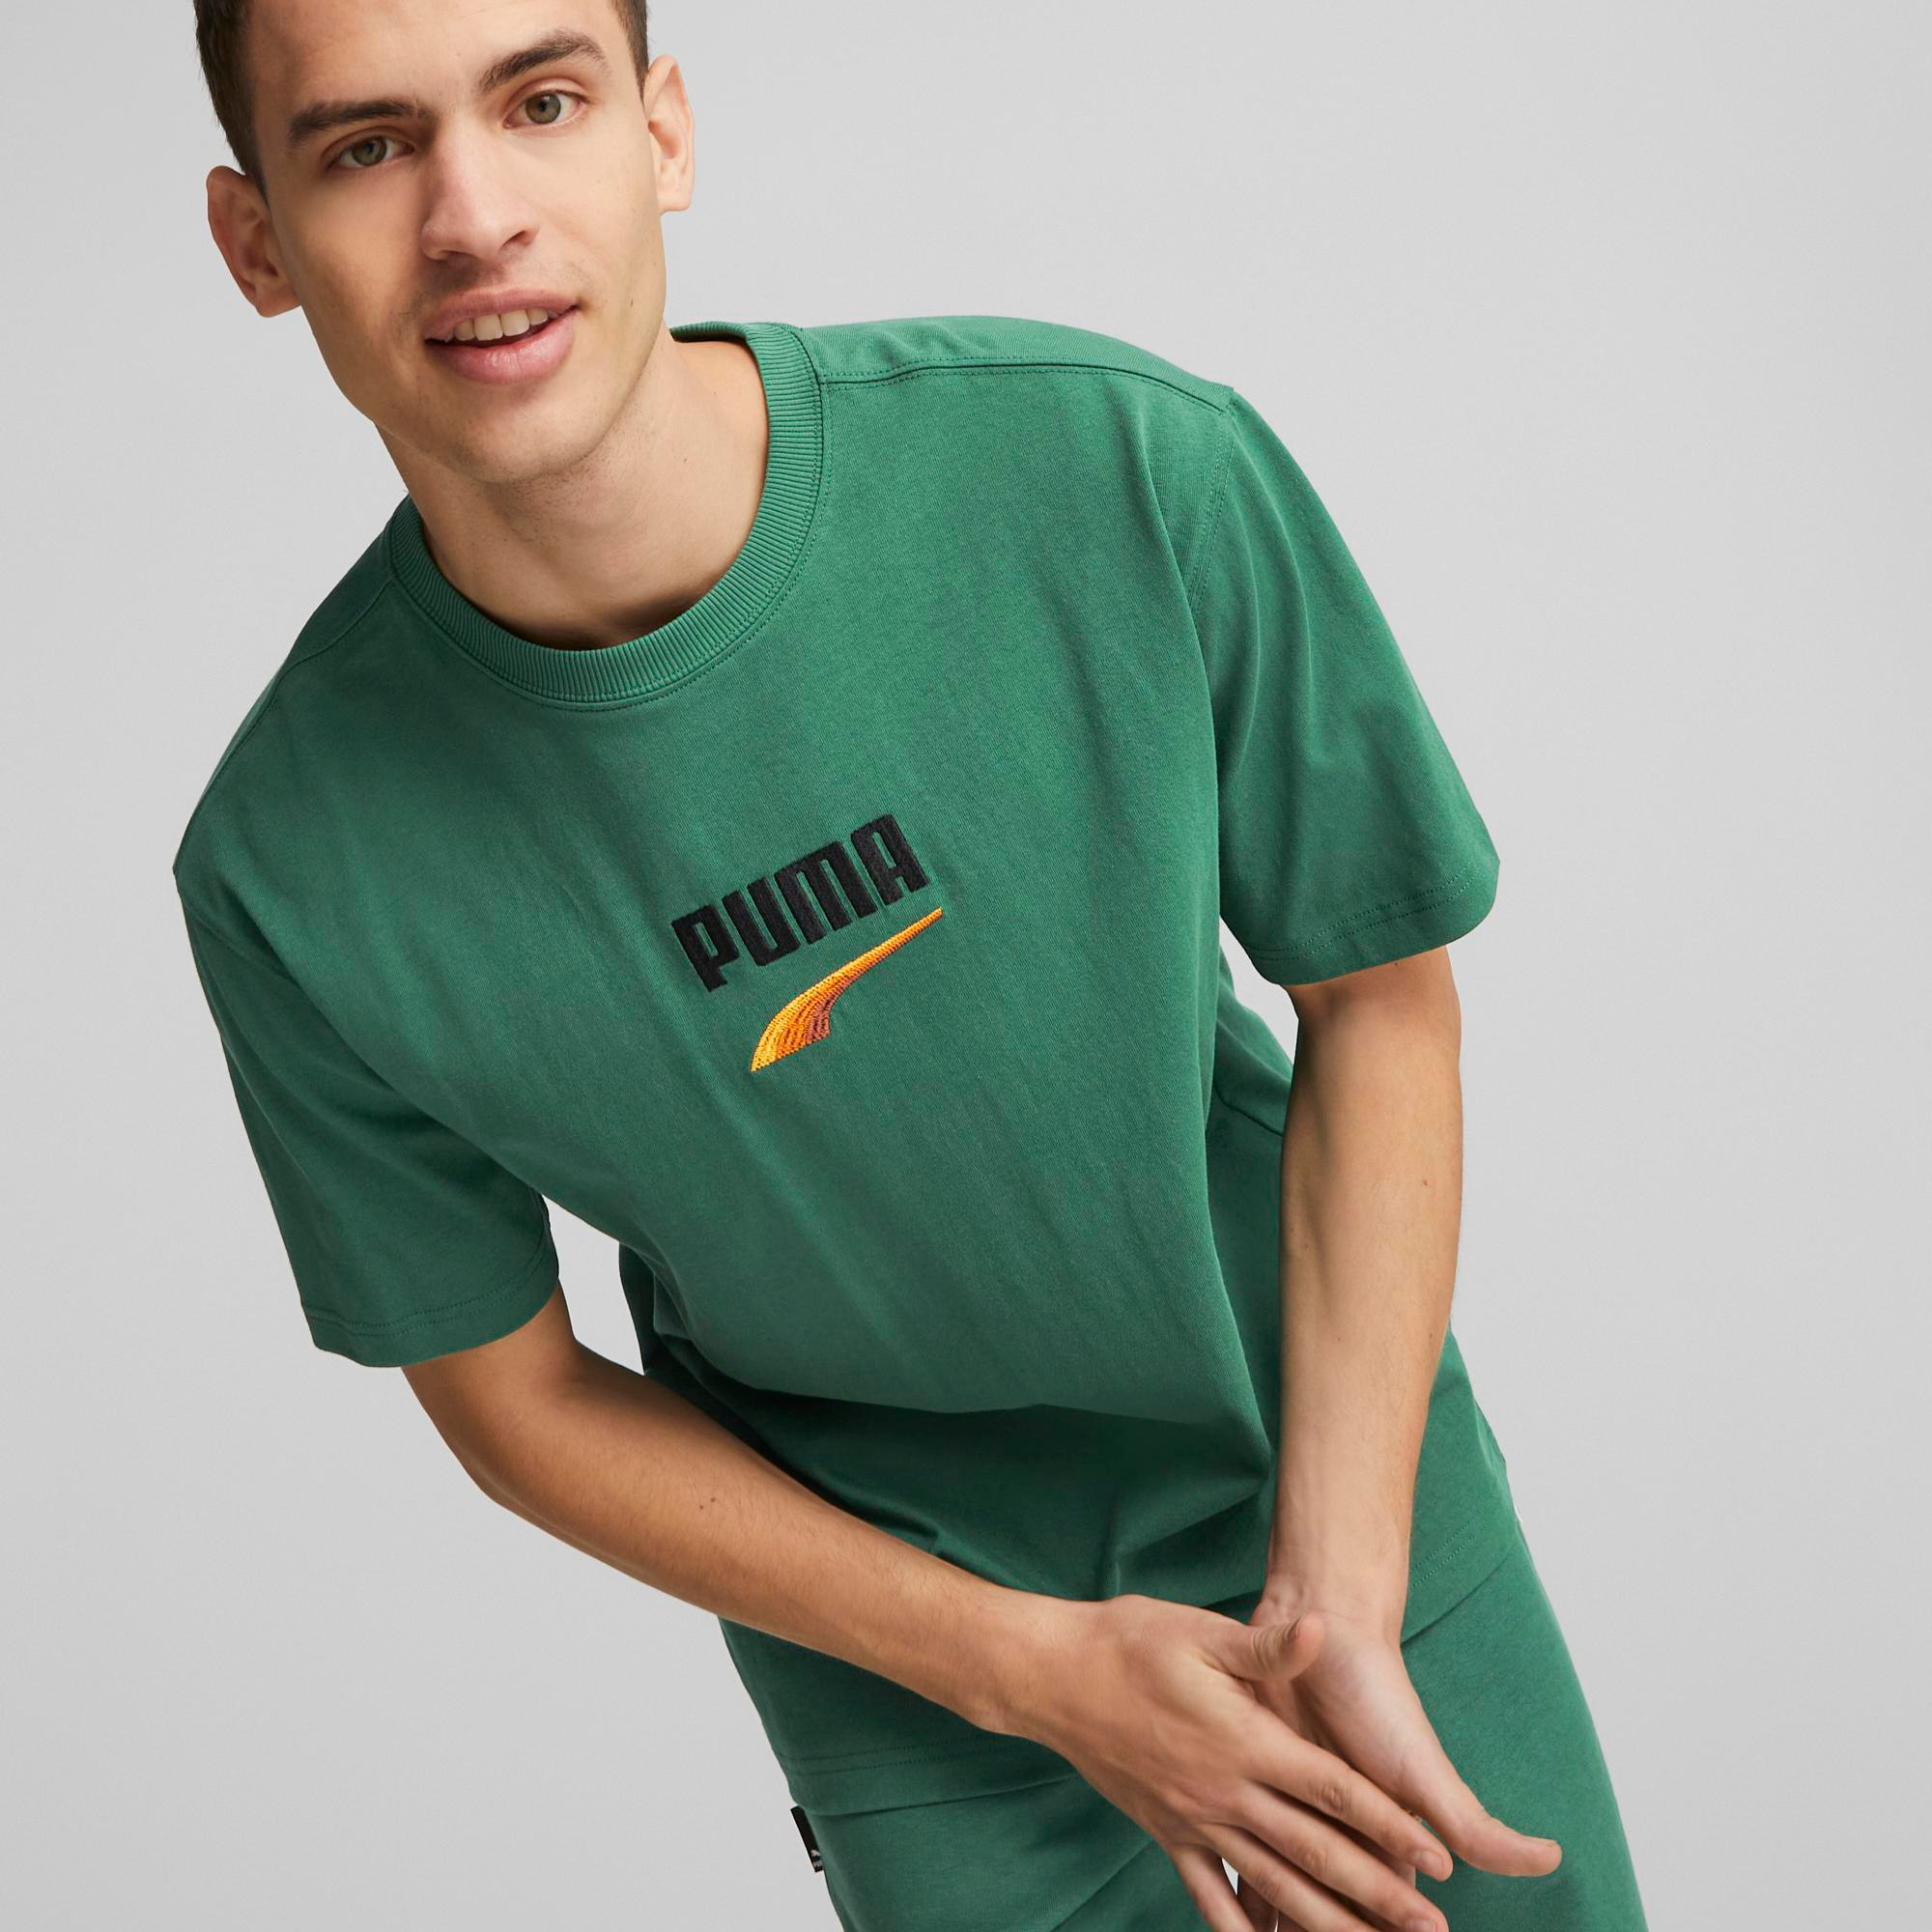 Puma - T-shirt in cotone con logo, Verde, large image number 2